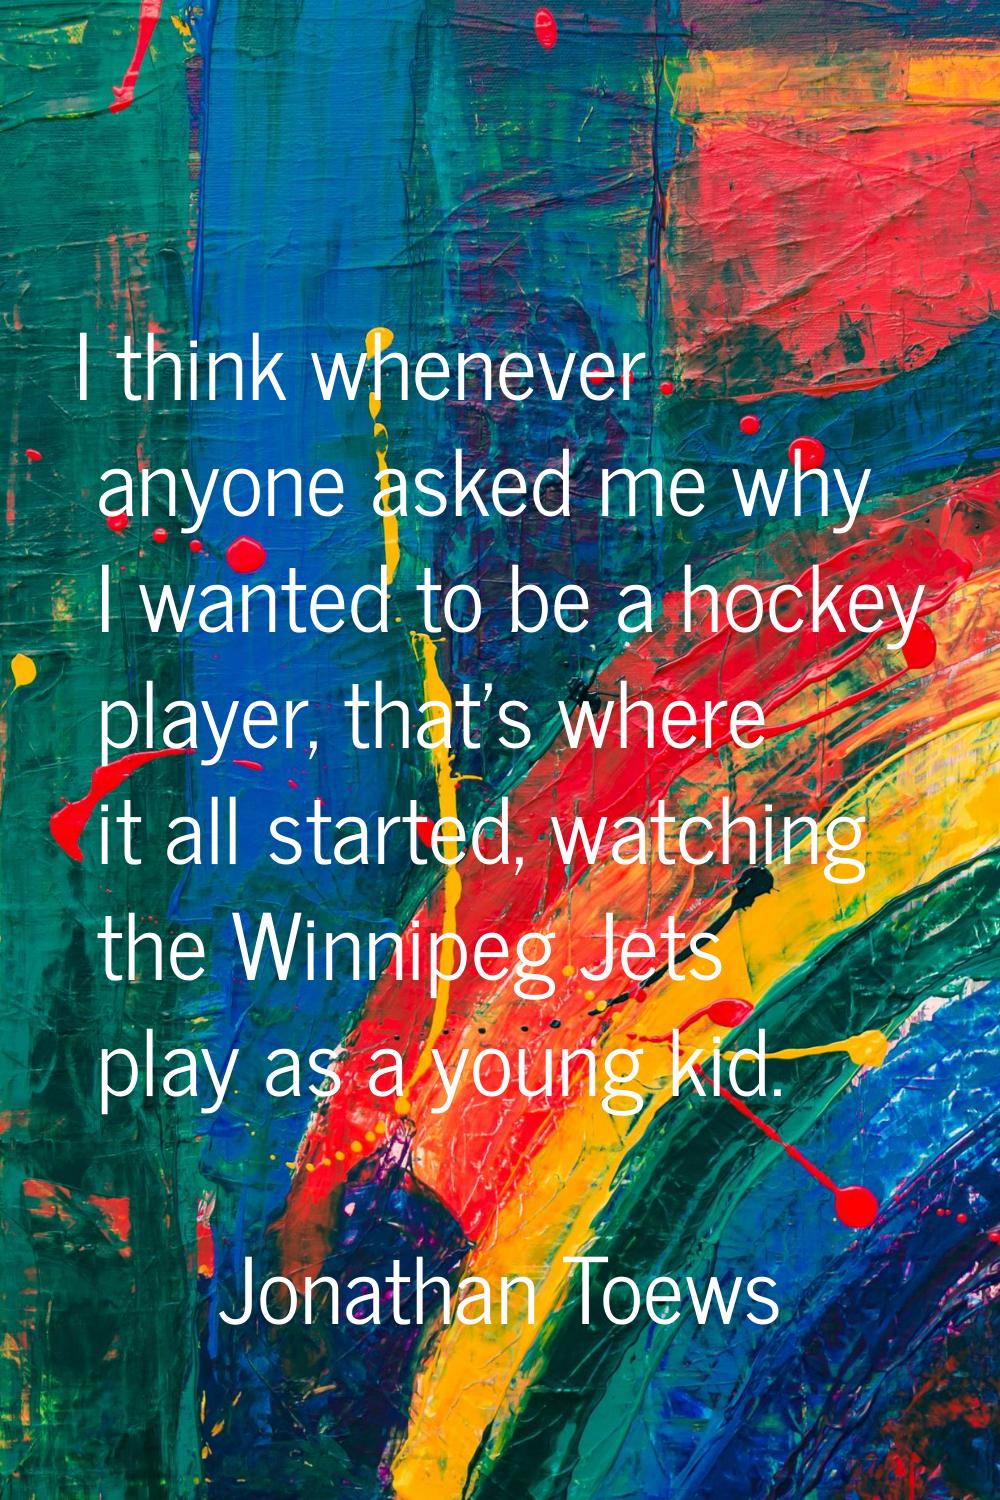 I think whenever anyone asked me why I wanted to be a hockey player, that's where it all started, w